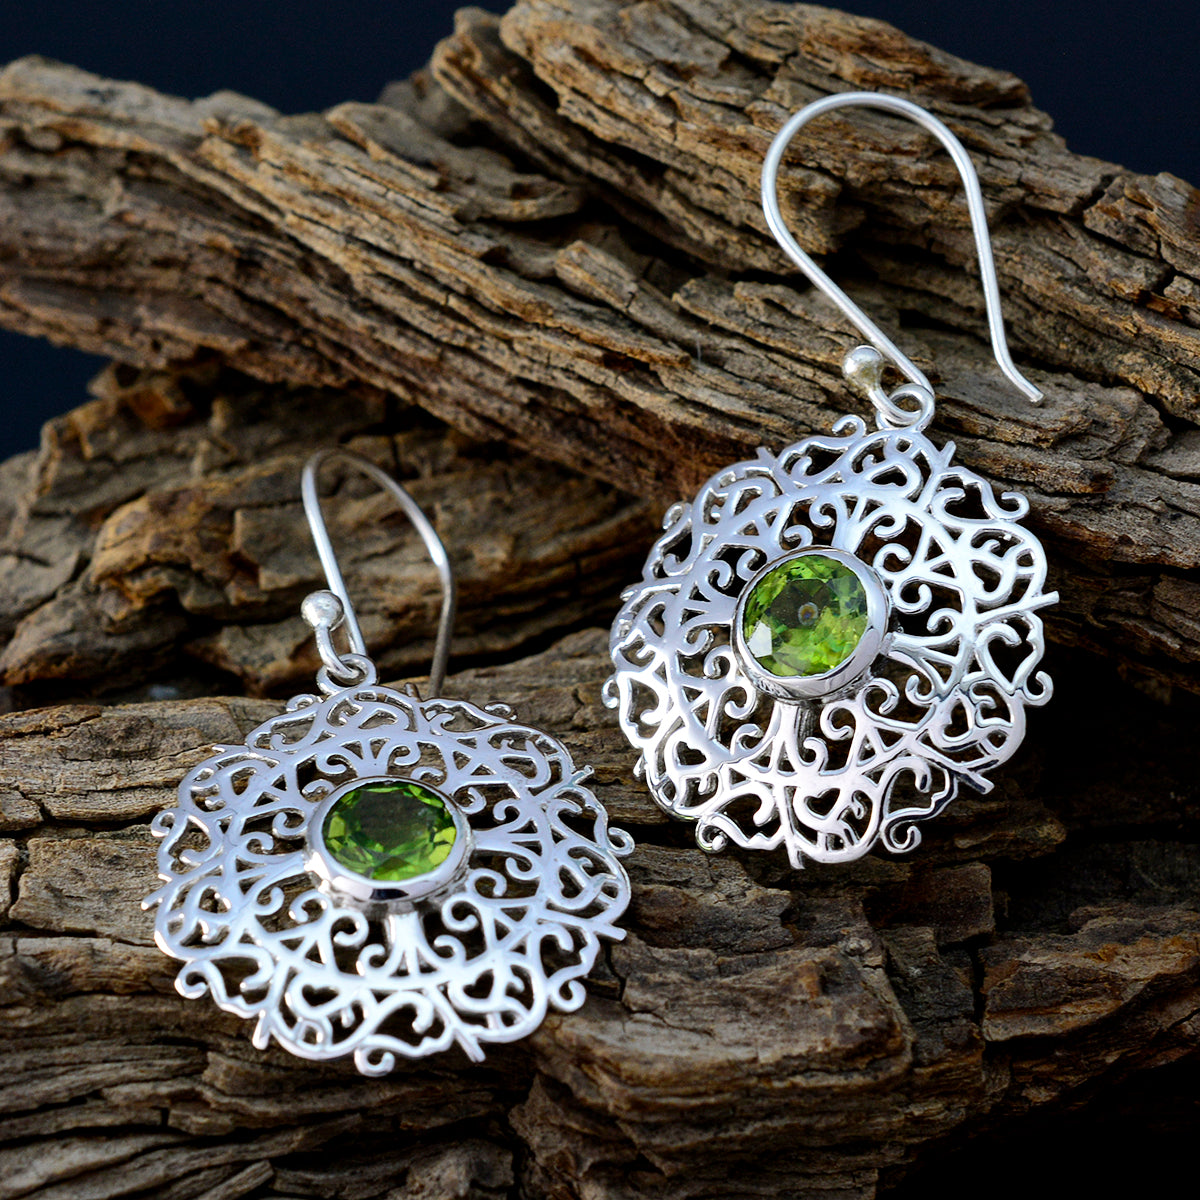 Riyo Genuine Gems round Faceted Green Peridot Silver Earrings gift for independence day